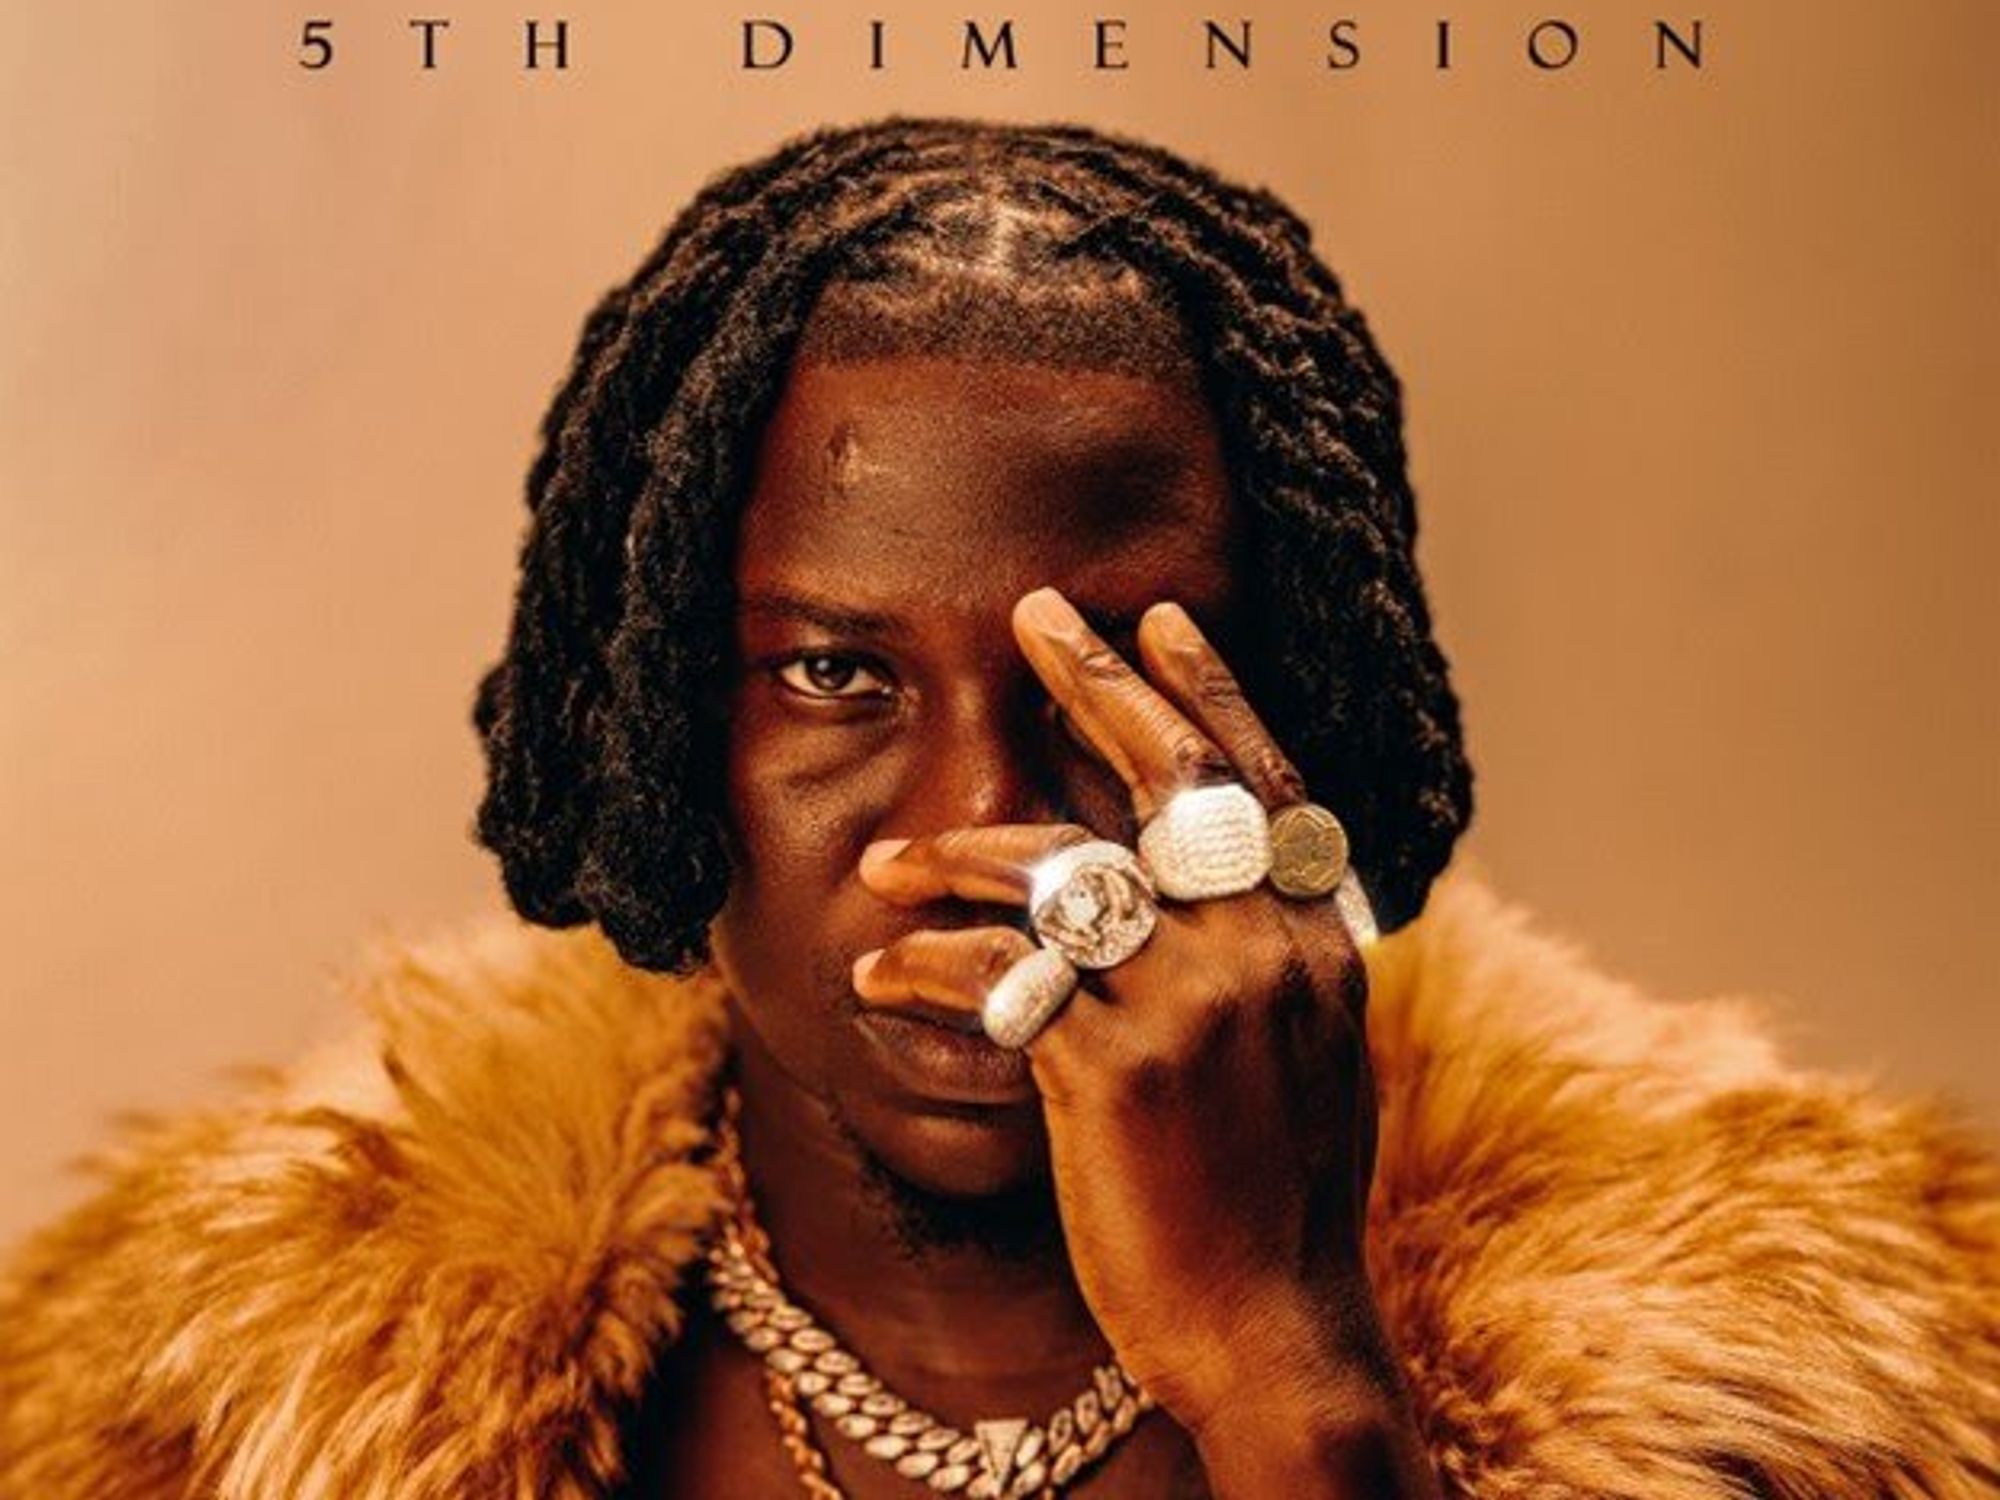 5th Dimensions by Stonebwoy.